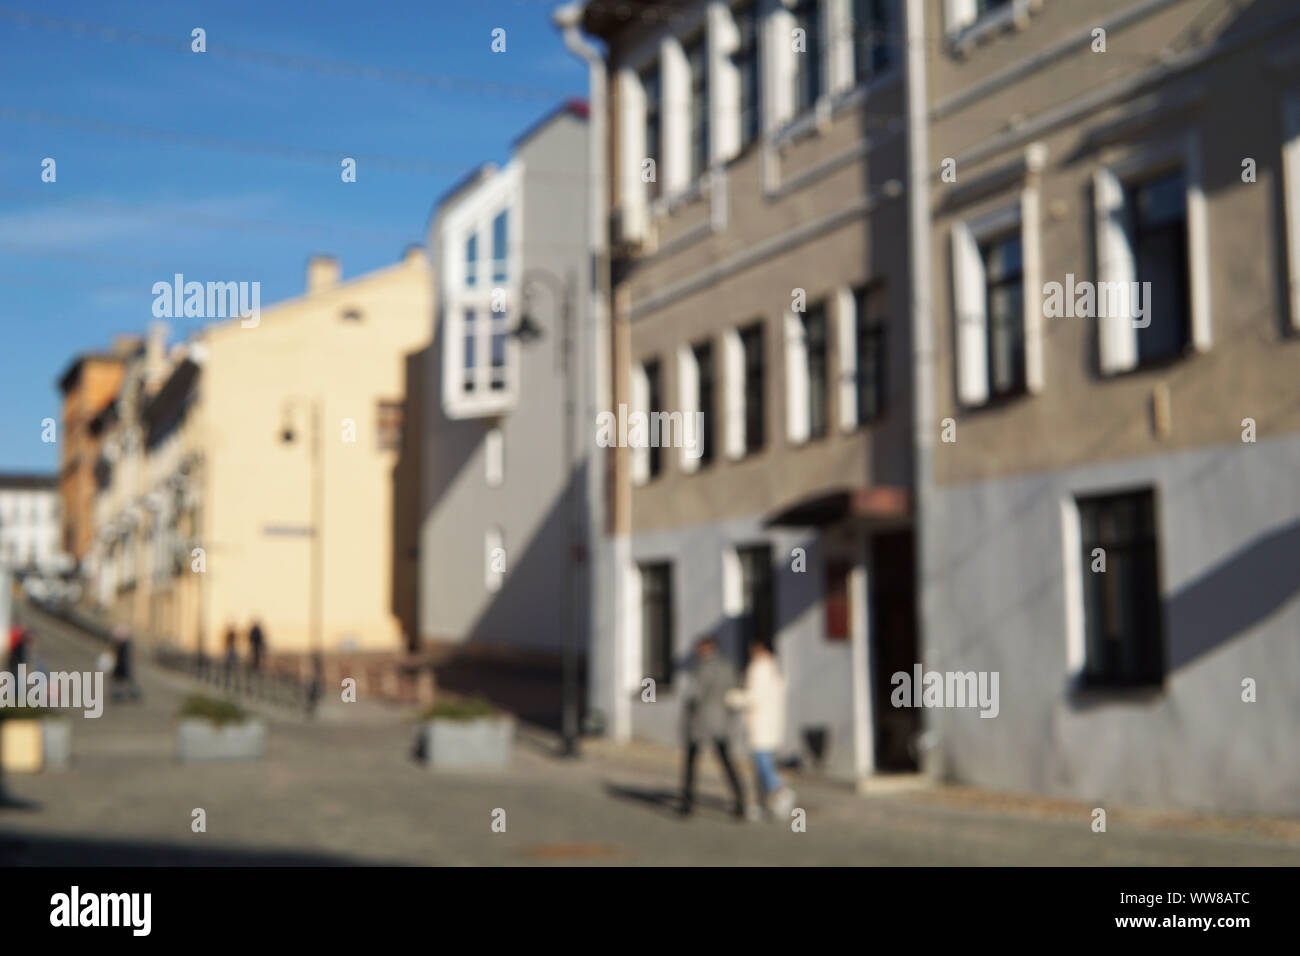 Couple of people on the street with old buildings on the background. Stock Photo